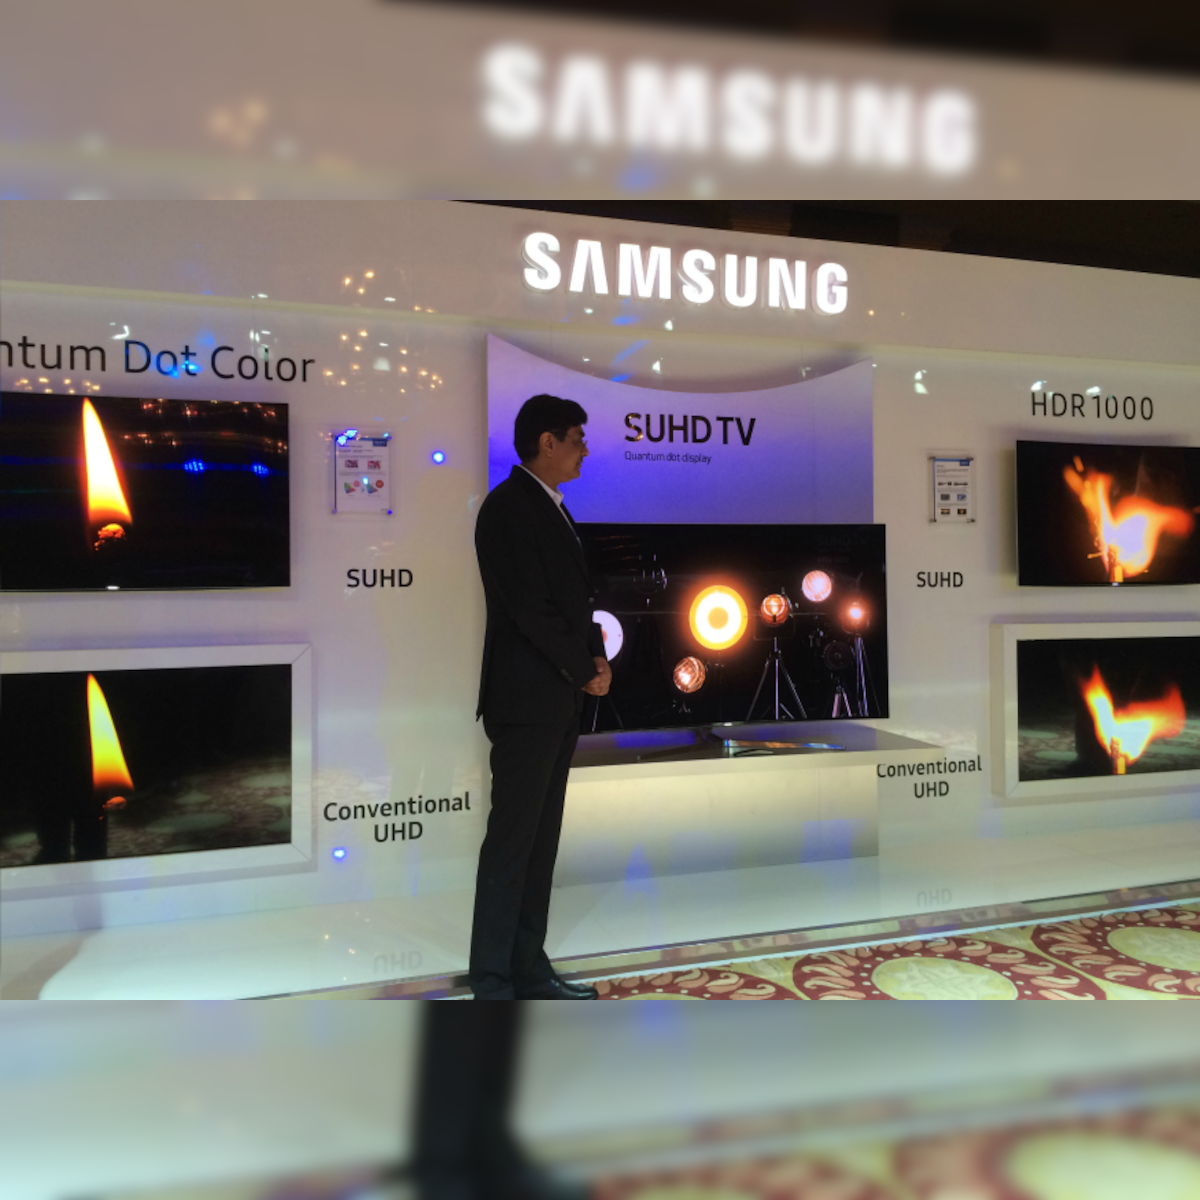 Samsung Tv Plus Free Streaming Service Could Soon Launch On Galaxy Smartphones